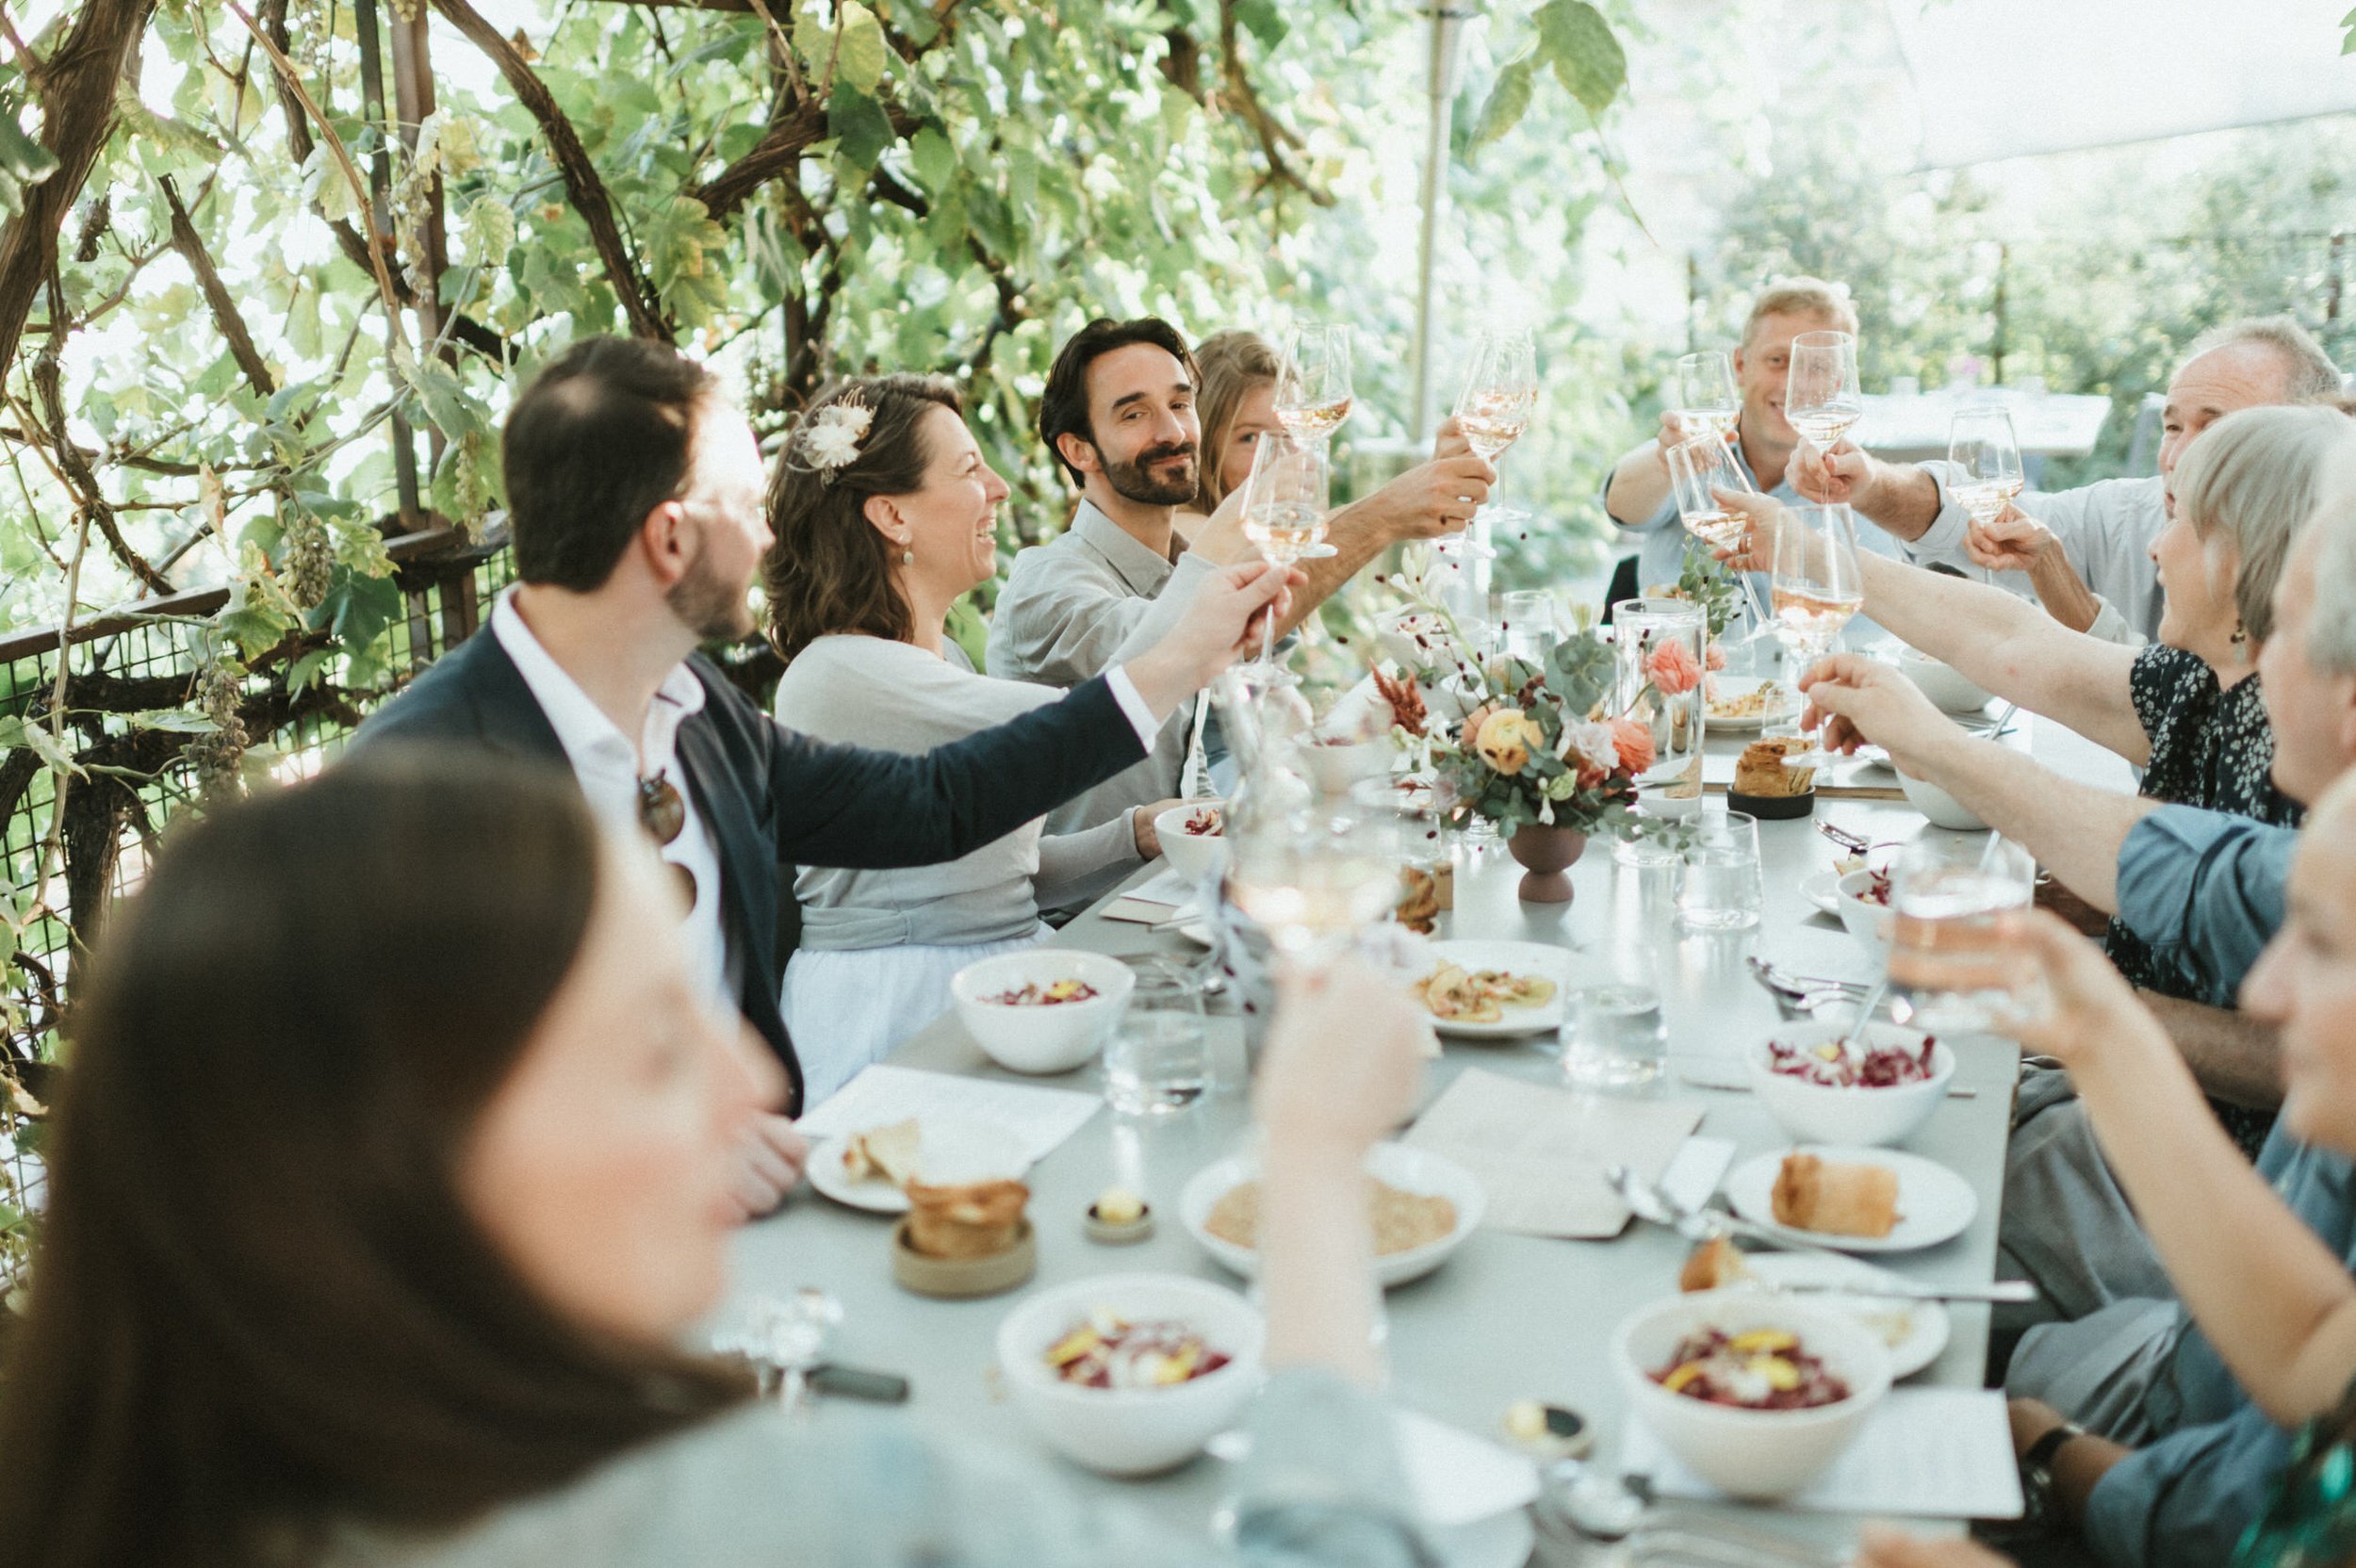 wedding party at table with colorful florals and backlighting doing cheers with wine glasses